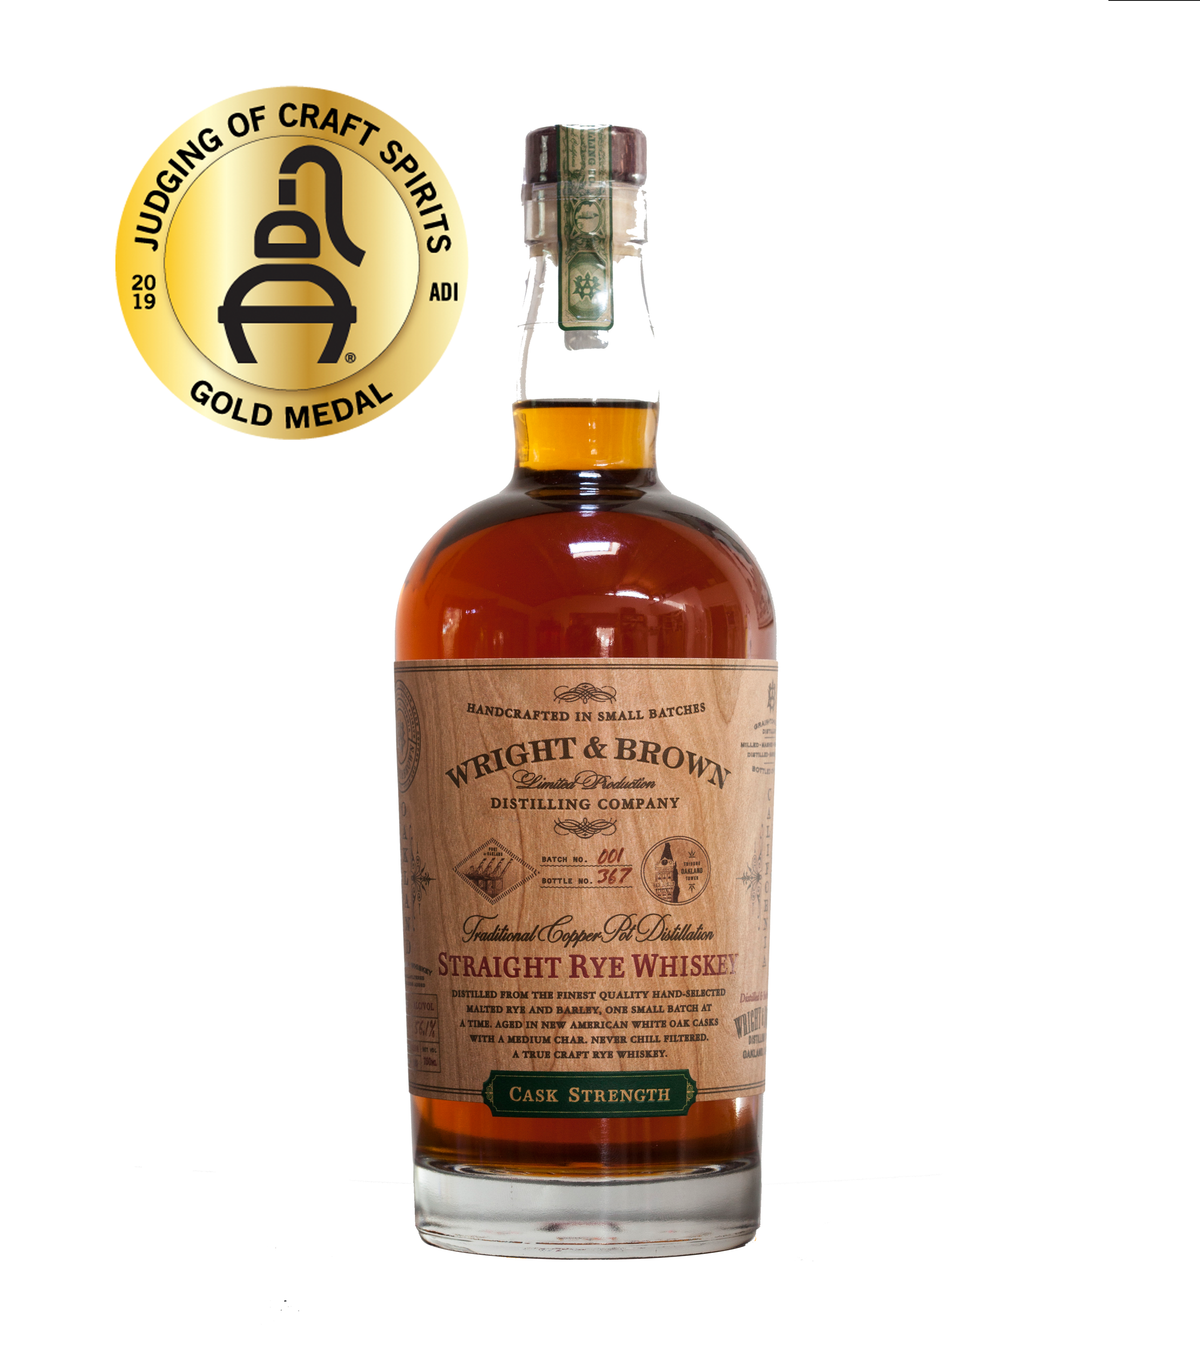 Wright & Brown Cask Strength Straight Rye Whiskey